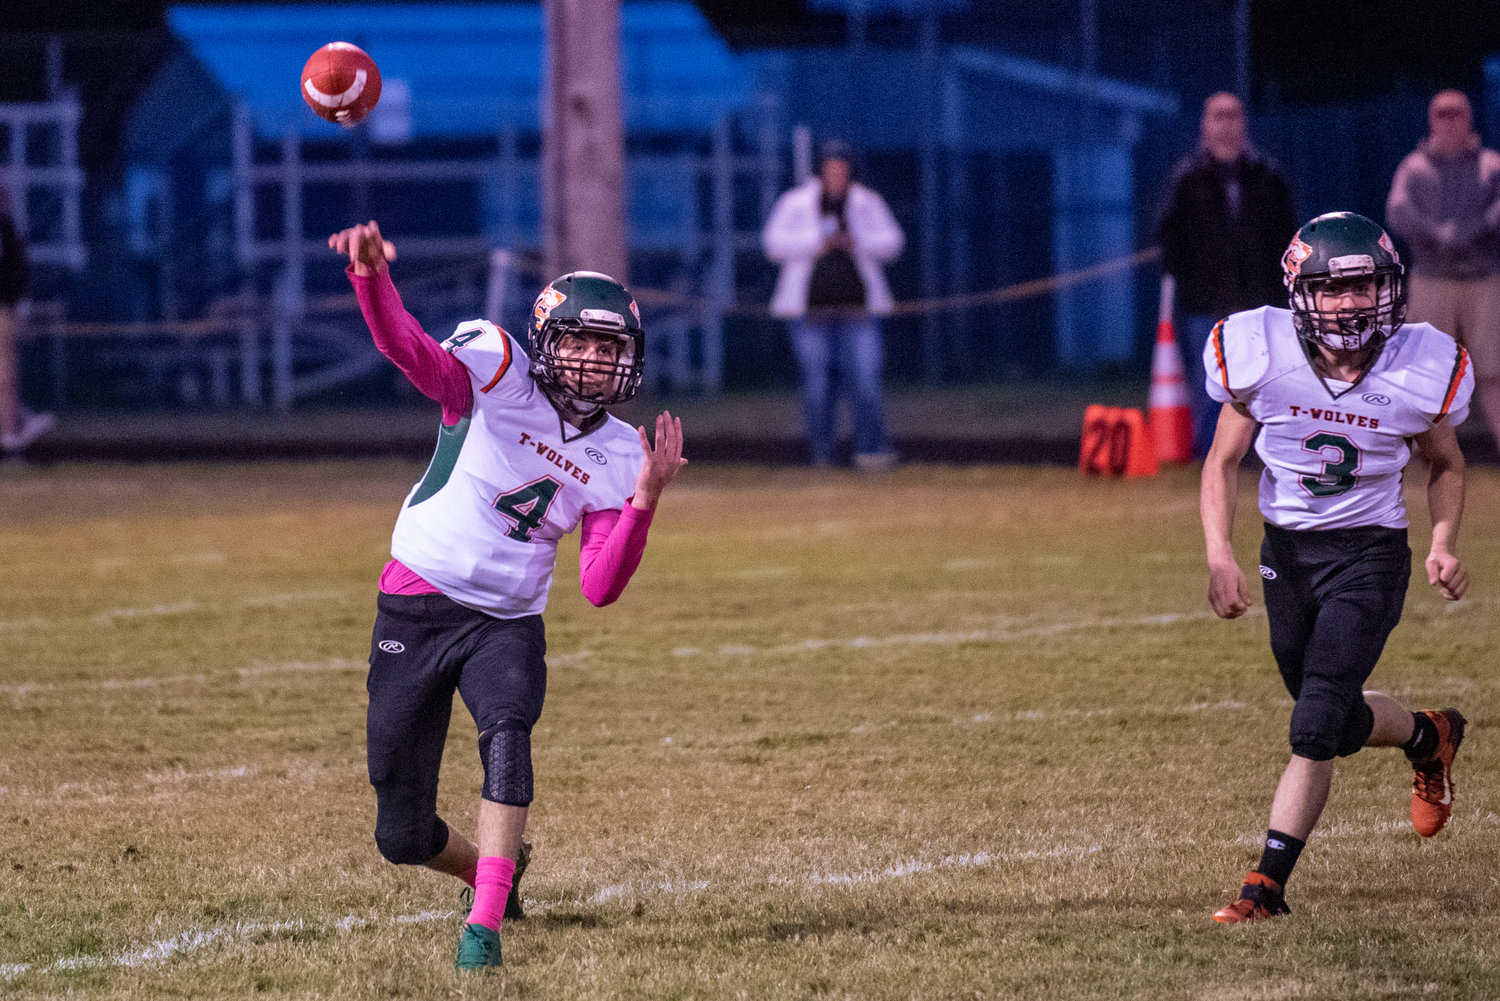 MWP quarterback Layten Collette (4) uncorks a pass toward the sideline while Brecken Pelletier (3) provides pass protection against PWV on Oct. 1, 2021.